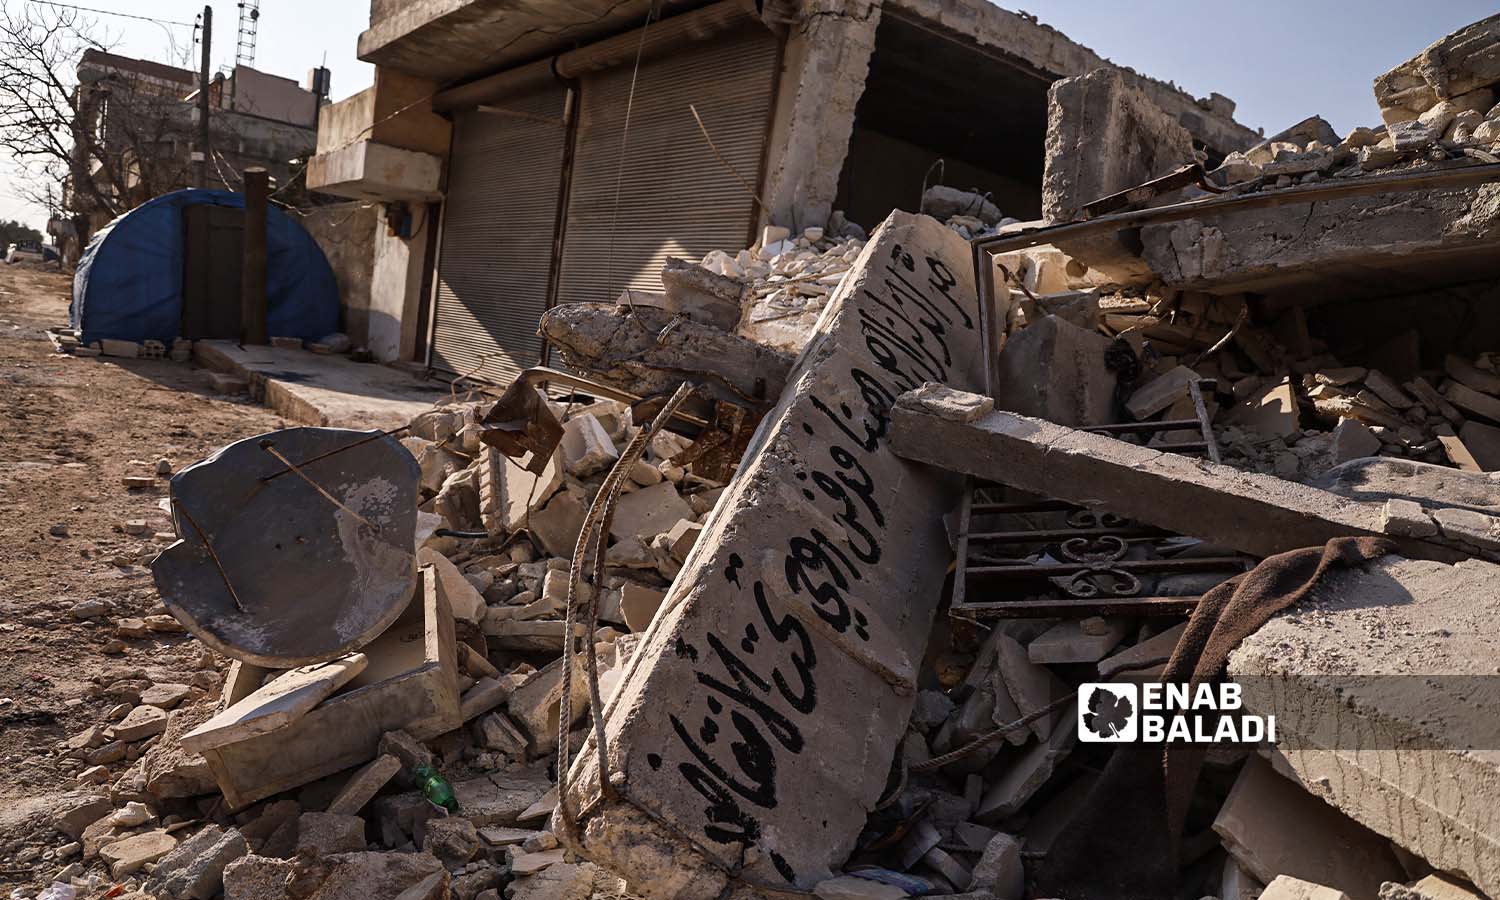 Graffiti drawings on the rubble of buildings destroyed by the earthquake in the city of Jindires, Aleppo countryside - February 24, 2023 (Enab Baladi/Amir Kharboutli)